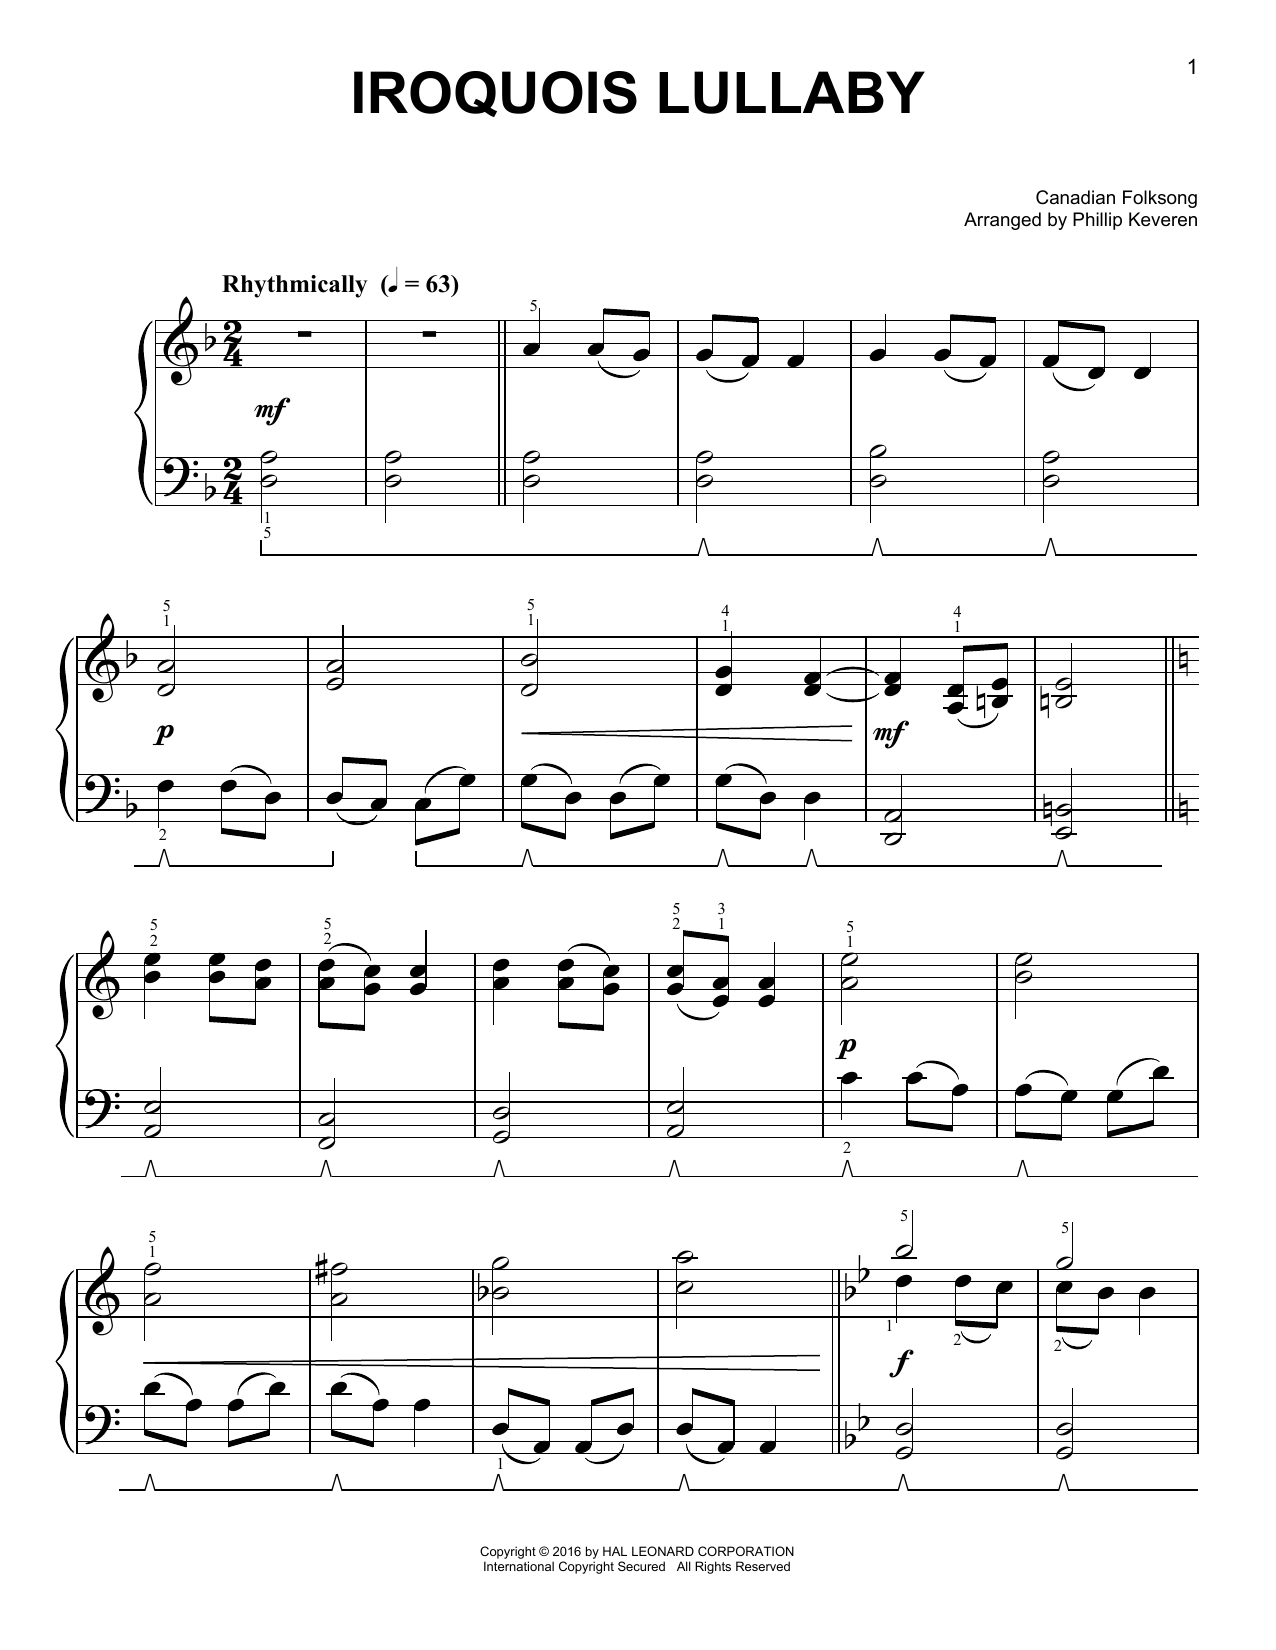 Download Canadian Folksong Iroquois Lullaby Sheet Music